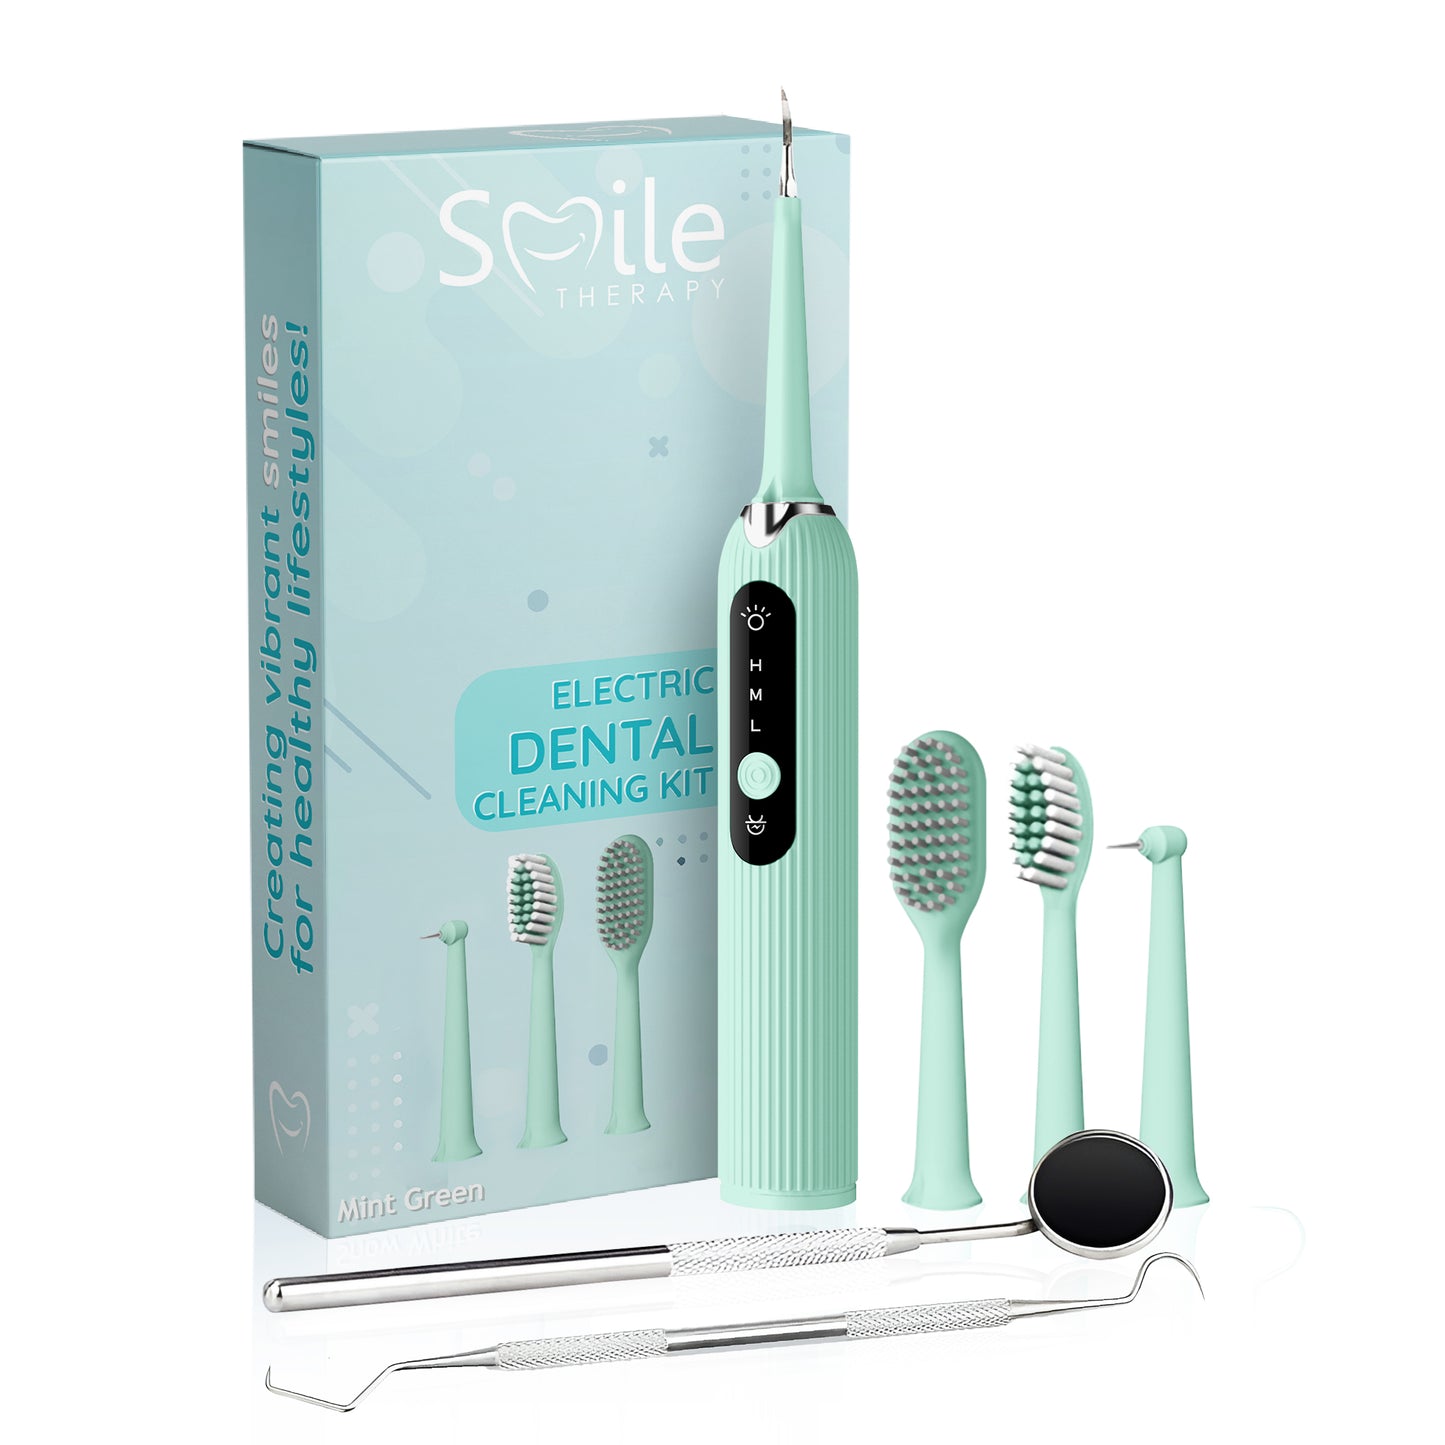 Electric Dental Cleaning Kit | Smile Therapy